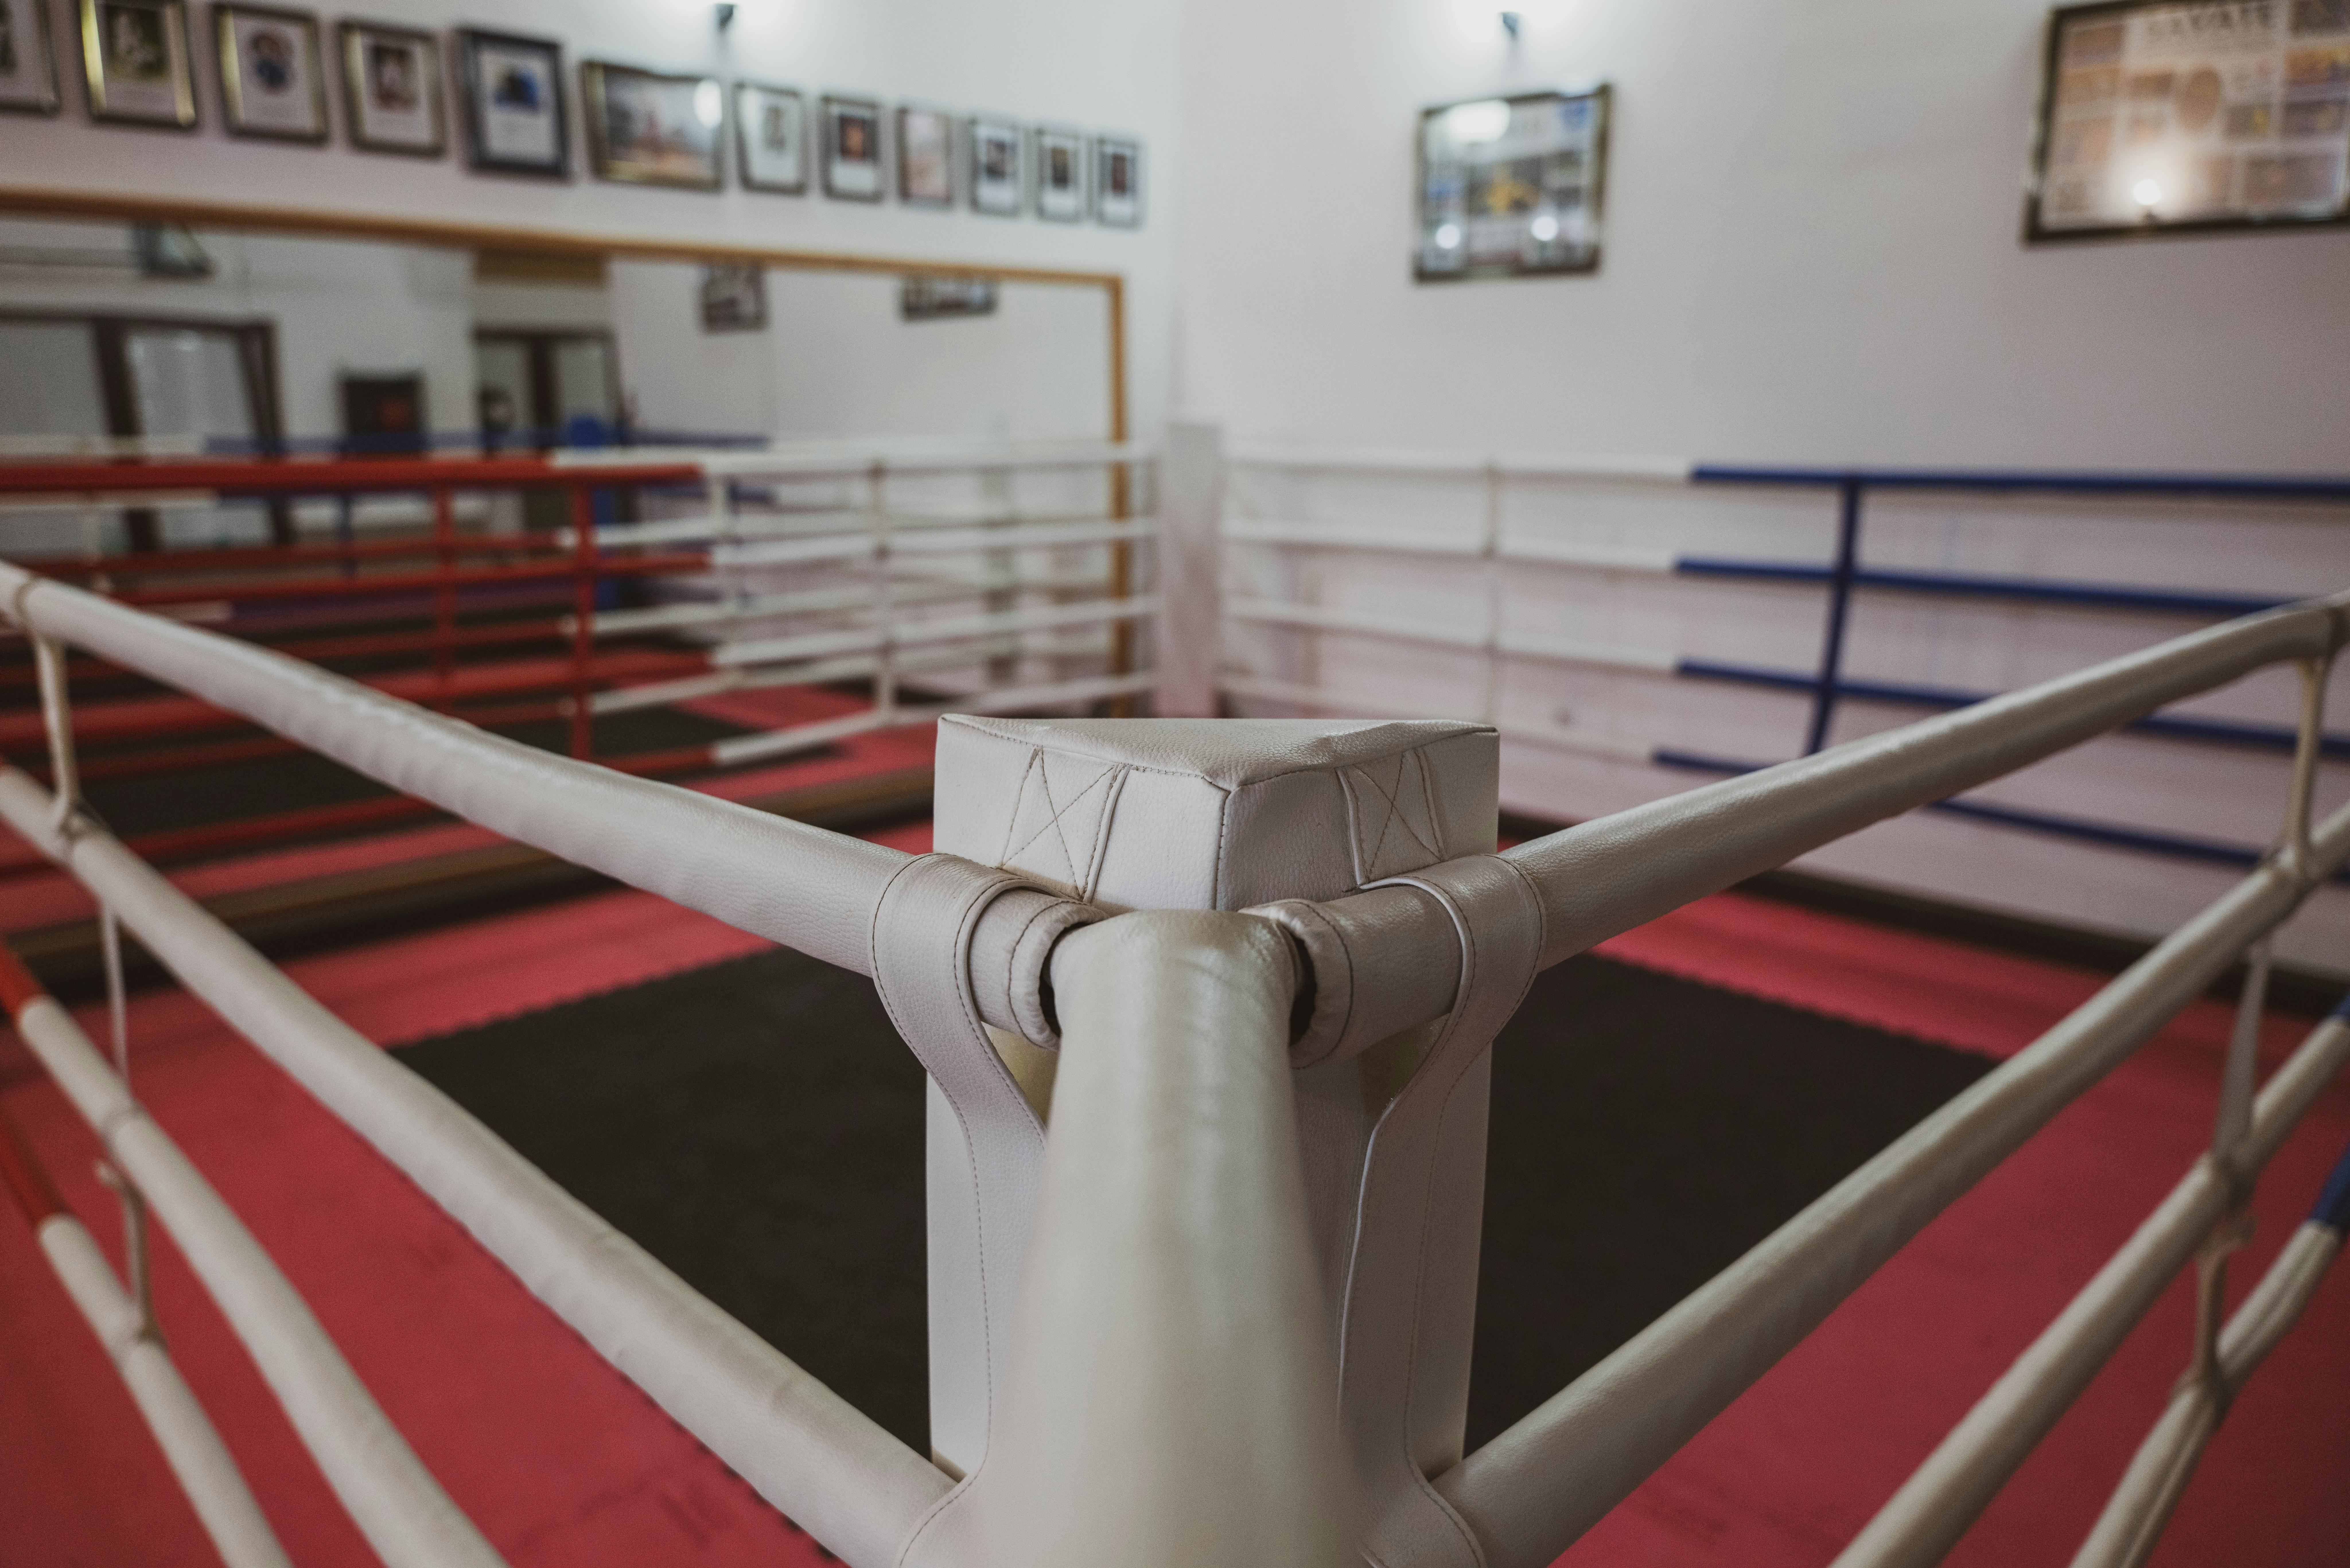 About / COVID-19 — Bristol Boxing Gym